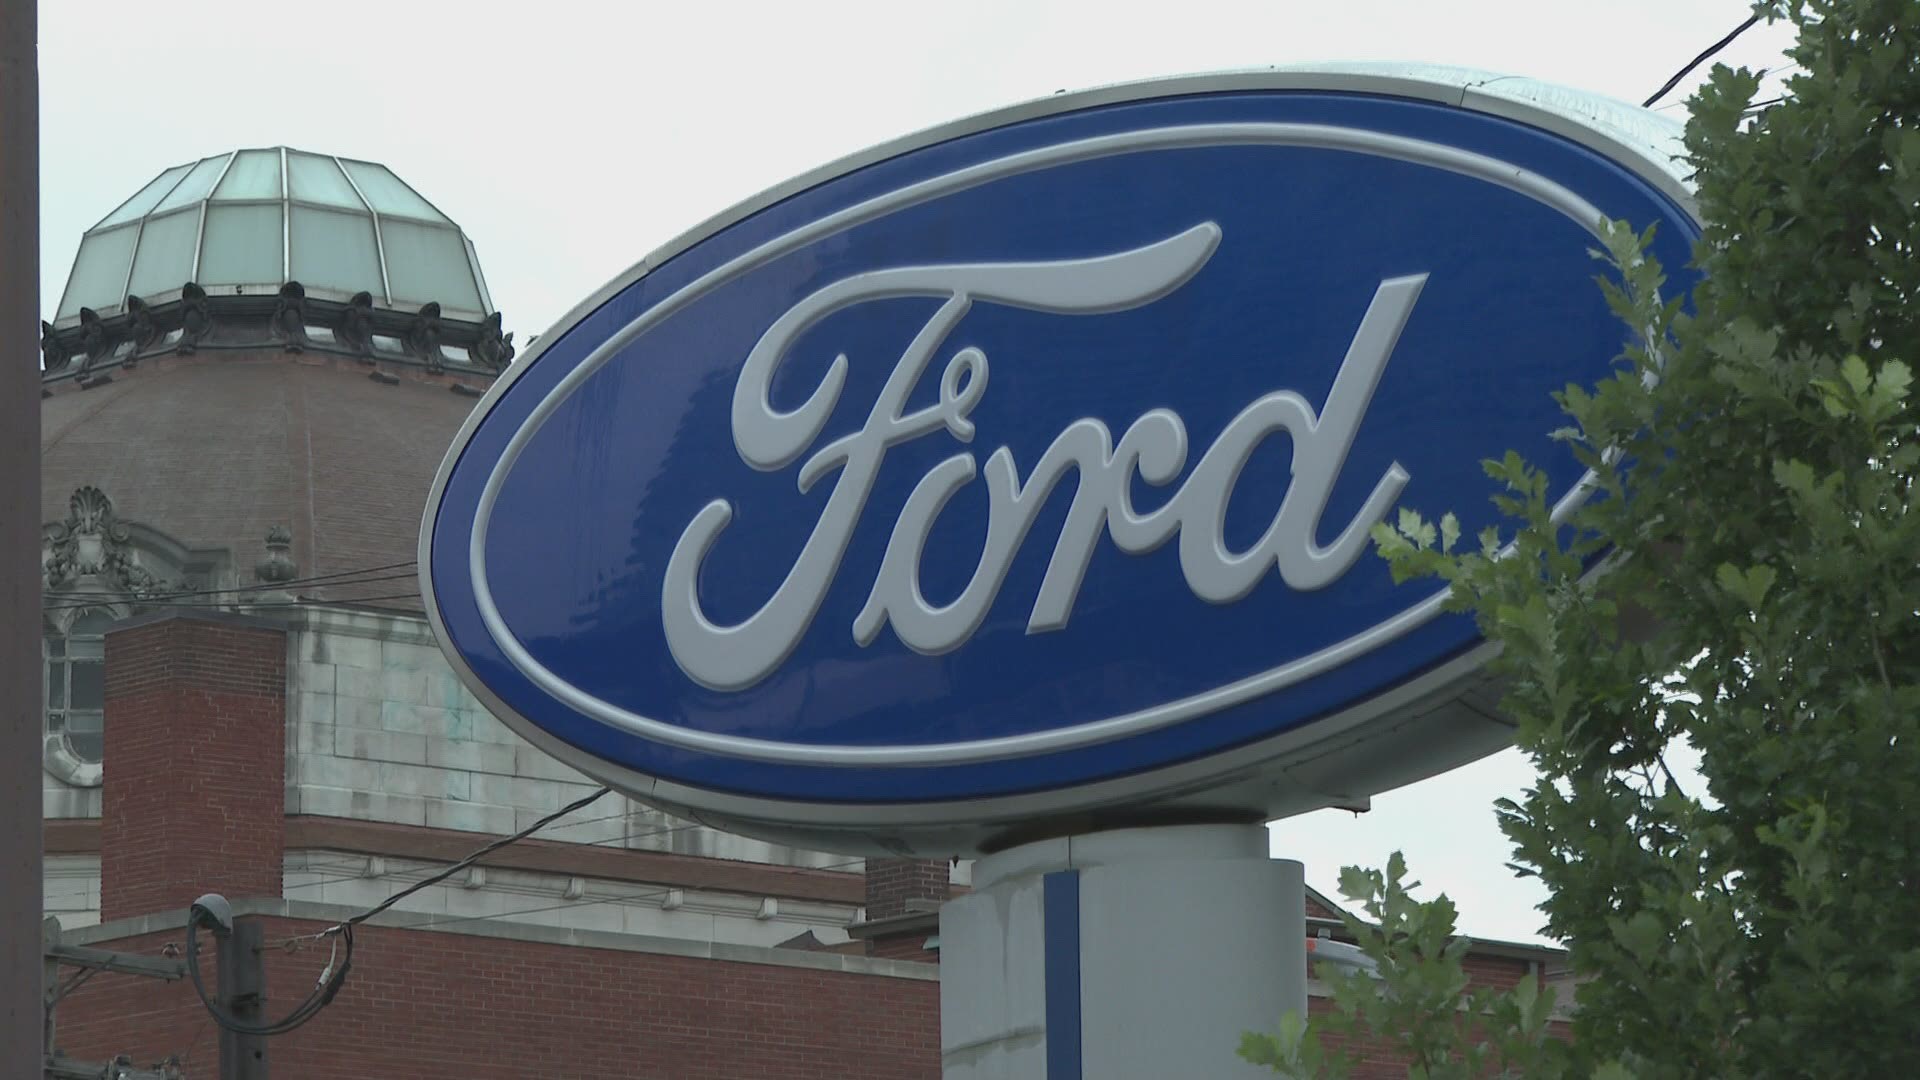 The Ford full size pick-up was the number one most targeted vehicle by thieves for the second year in a row, according to the report.